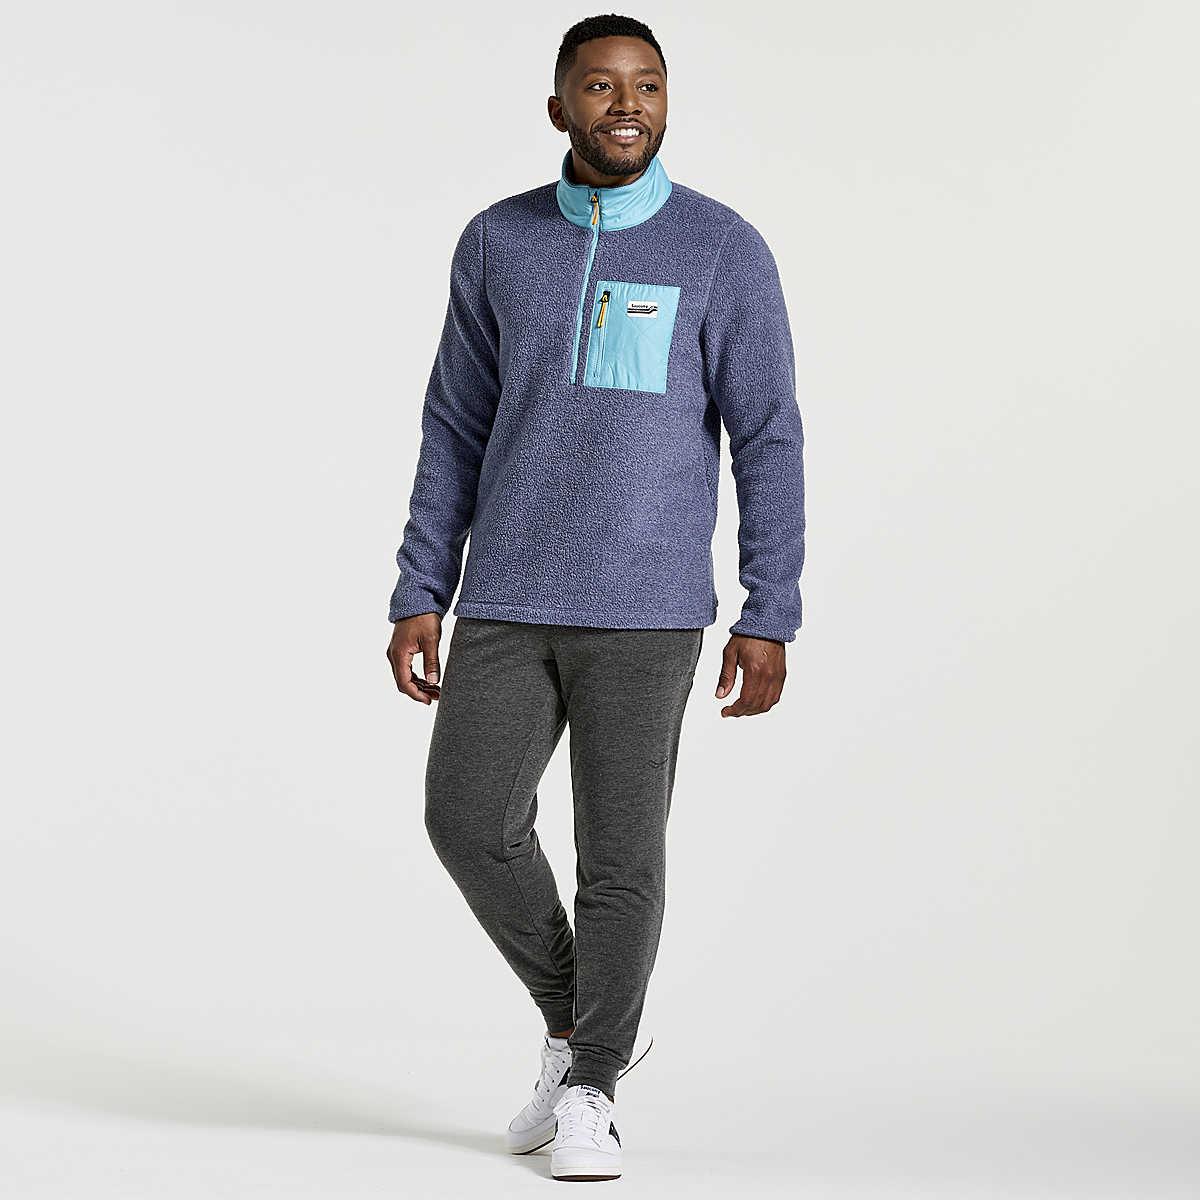 Saucony - Men's Rested Sherpa 1/4 Zip - The Shoe Collective